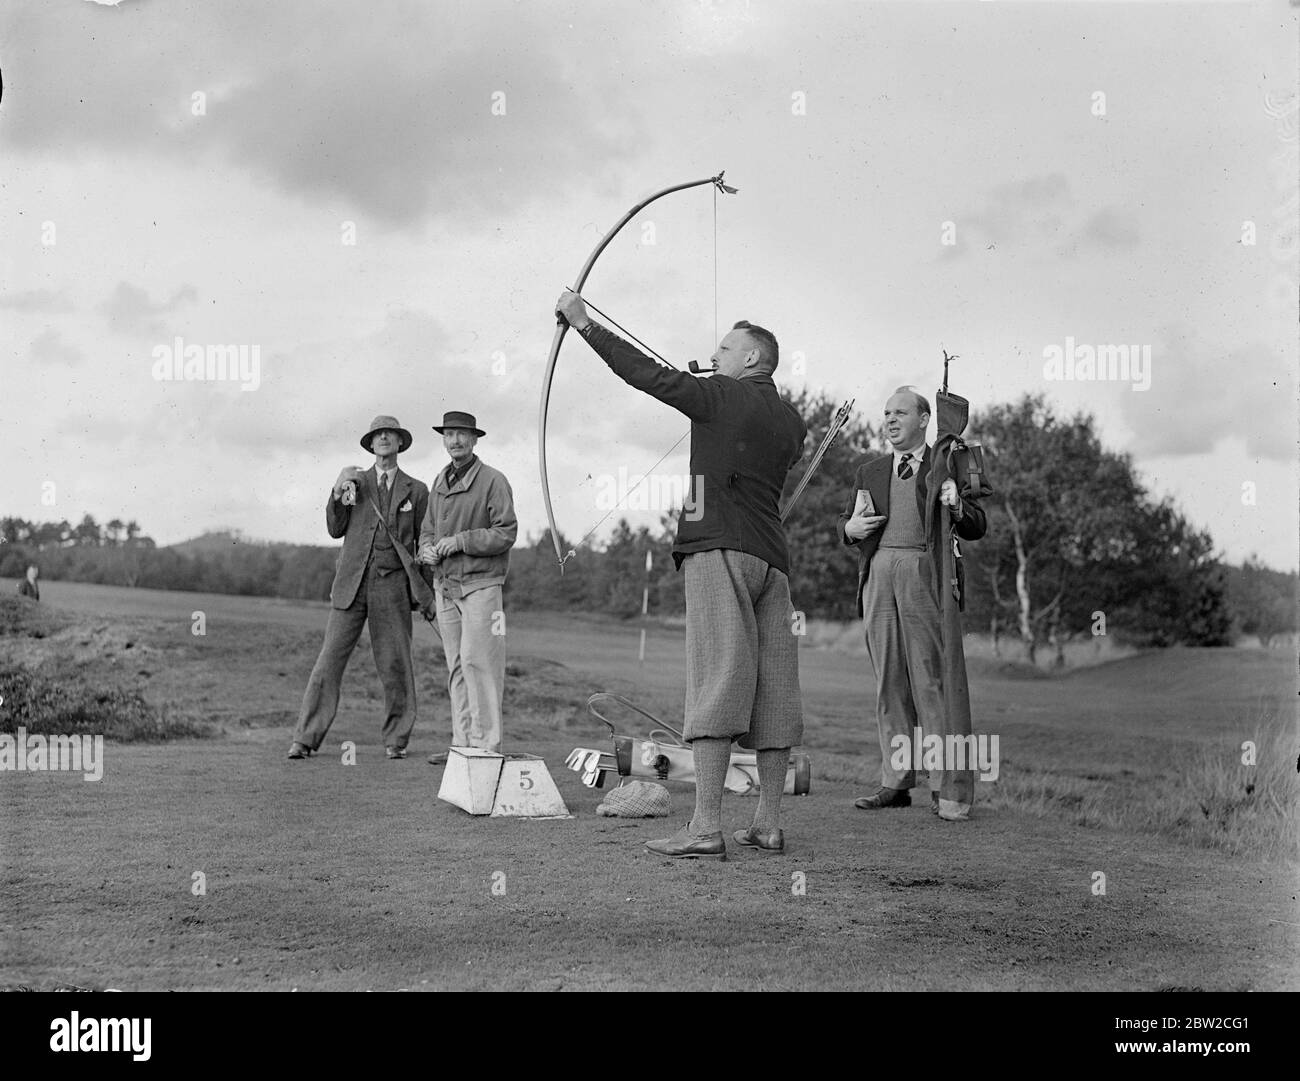 Playing with bow and arrow, Major J G Hayter, acknowledged expert at the annual sport of bow and arrow golf, met Colonel E St George Kirke, the captain of the club, in a match at the Hankley Common Golf Club, Surrey. He conceded a stroke a gale.Major Hayter shoots his arrow into a box instead of a hole.His average for most of the Surrey courses is in the seventies. Photo shows: Major J G Hayter shooting an arrow. 18 October 1938 Stock Photo